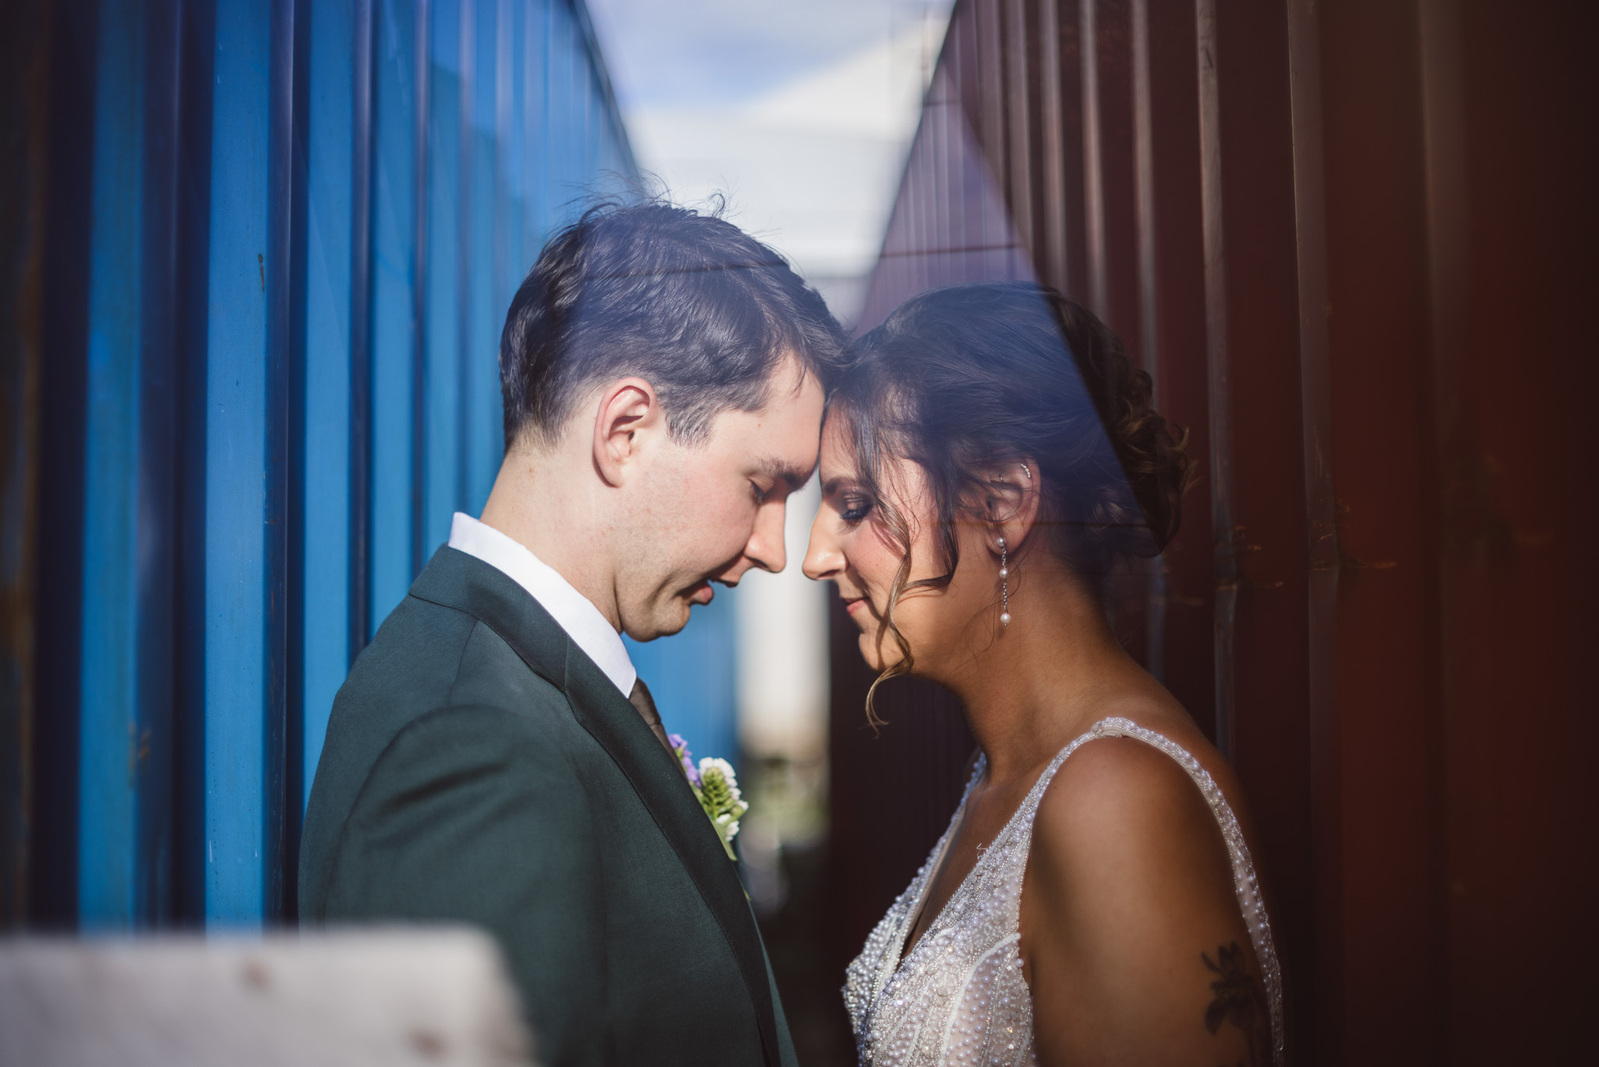 milwaukee wedding couple stands touching foreheads.  wedding day, bridal portraits, symmetrical.  shipping containers in blue and red, couple stands in good light.